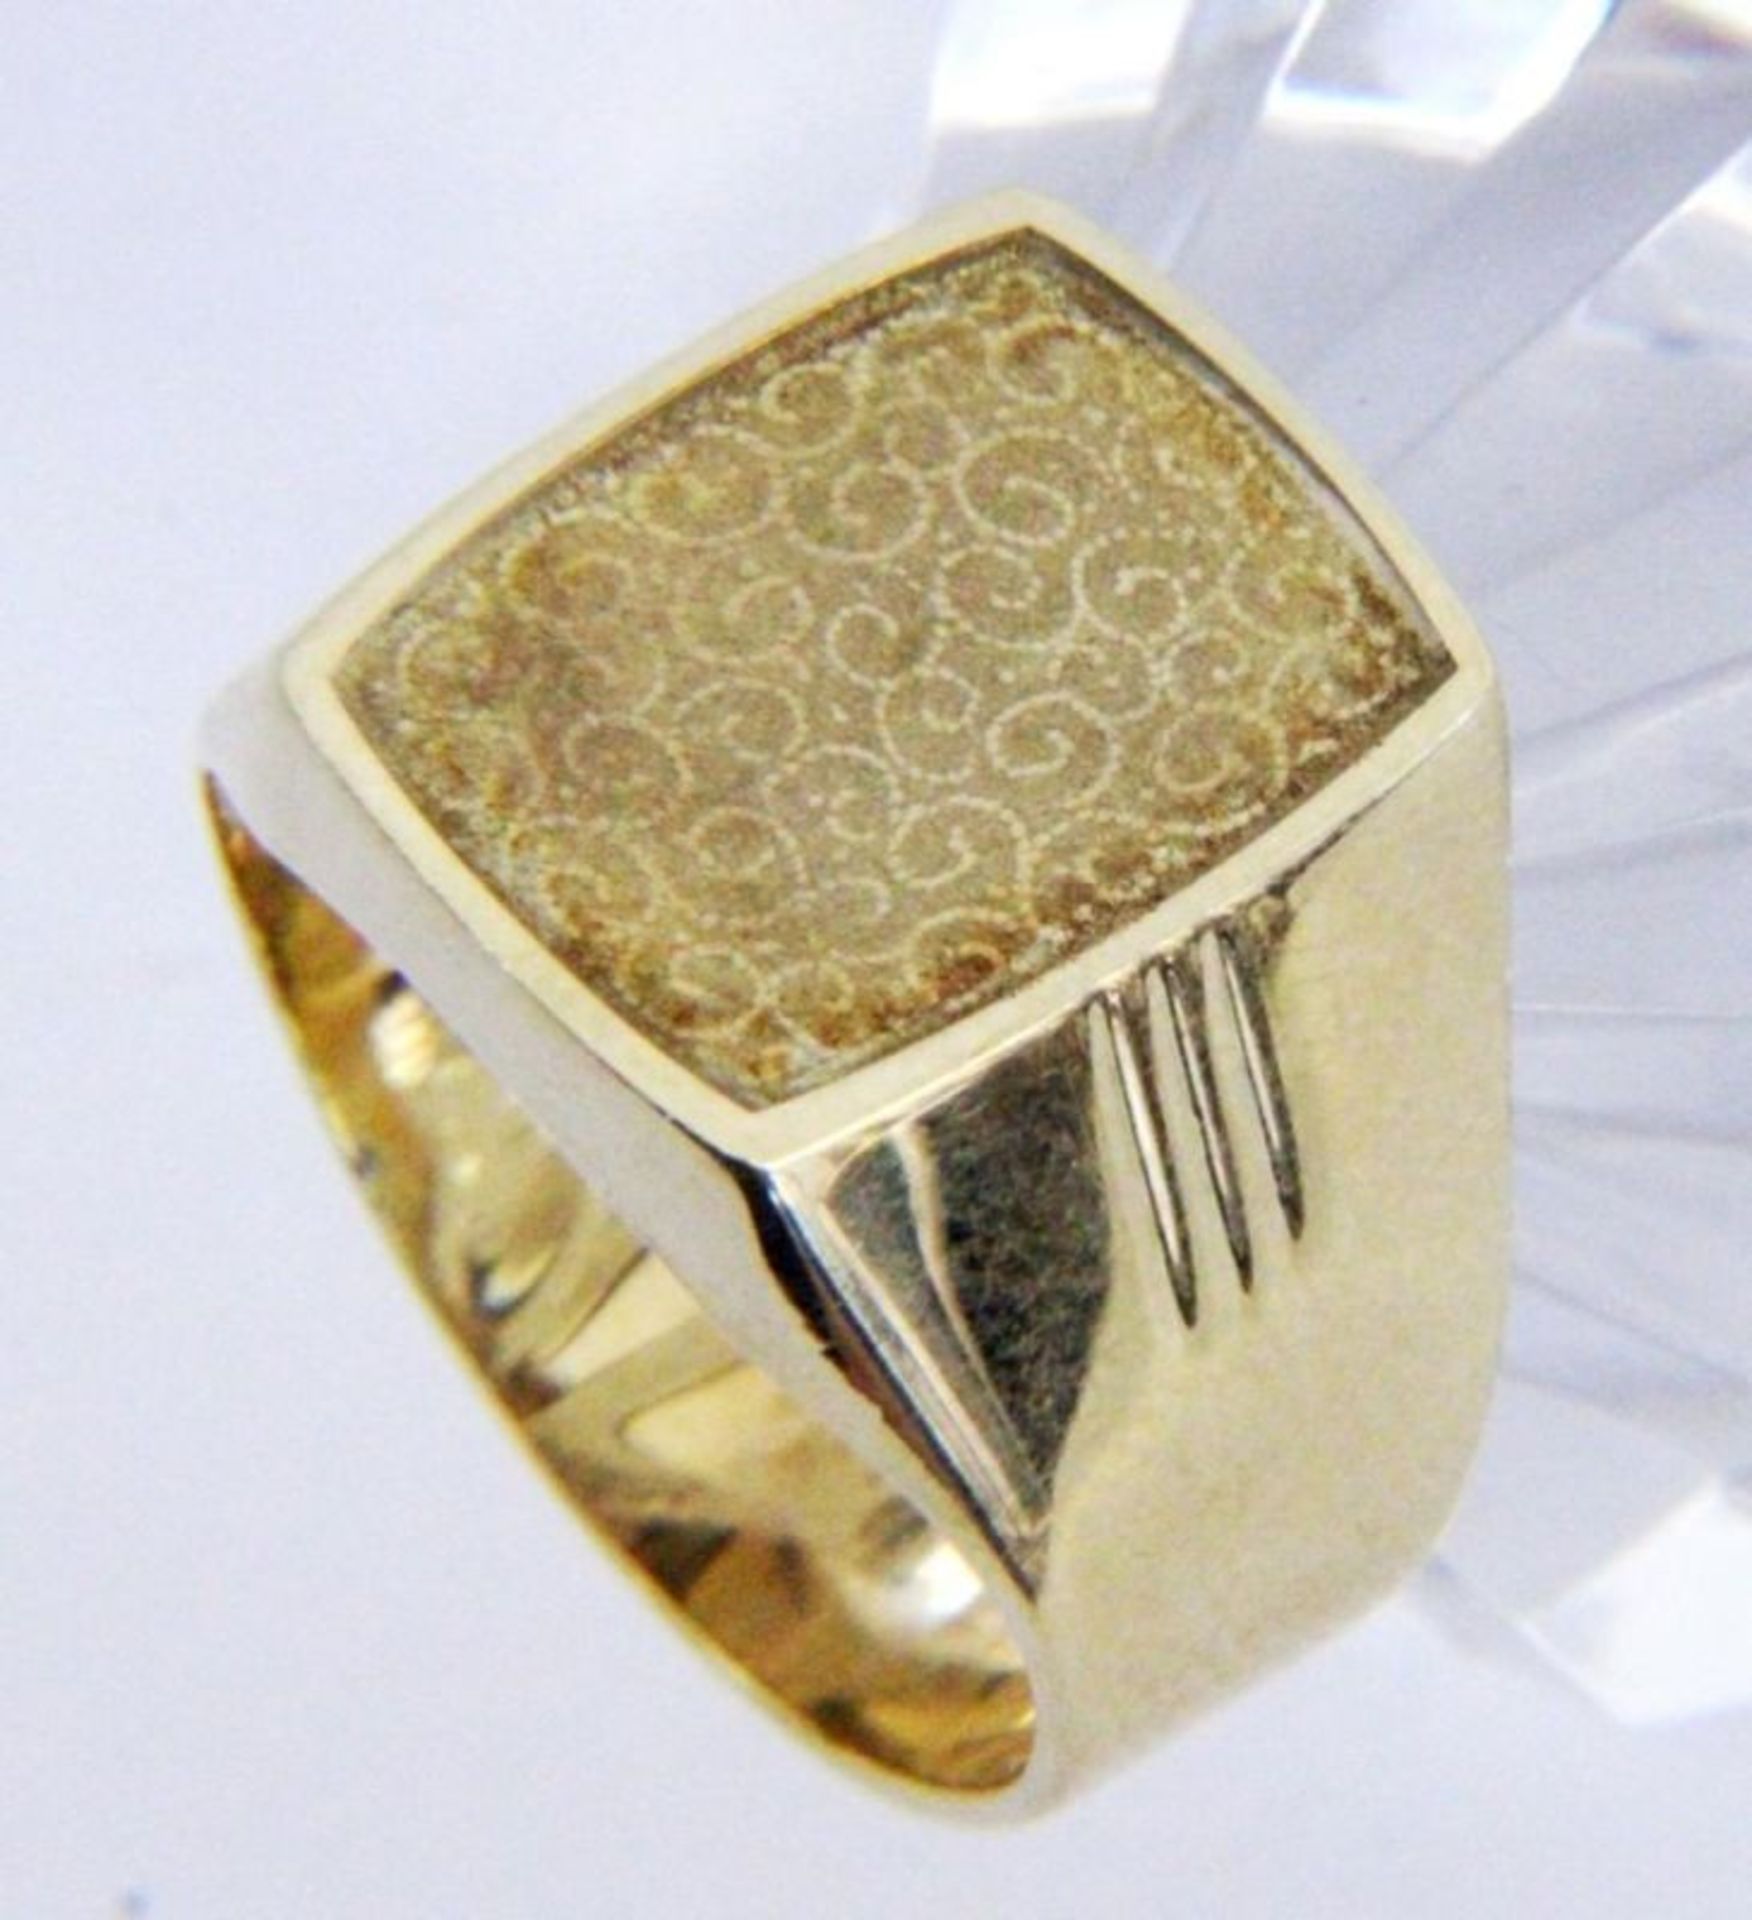 A MEN'S RING 585/000 yellow gold. Ring size 61, gross weight approx. 7.8 grams. Keywords: